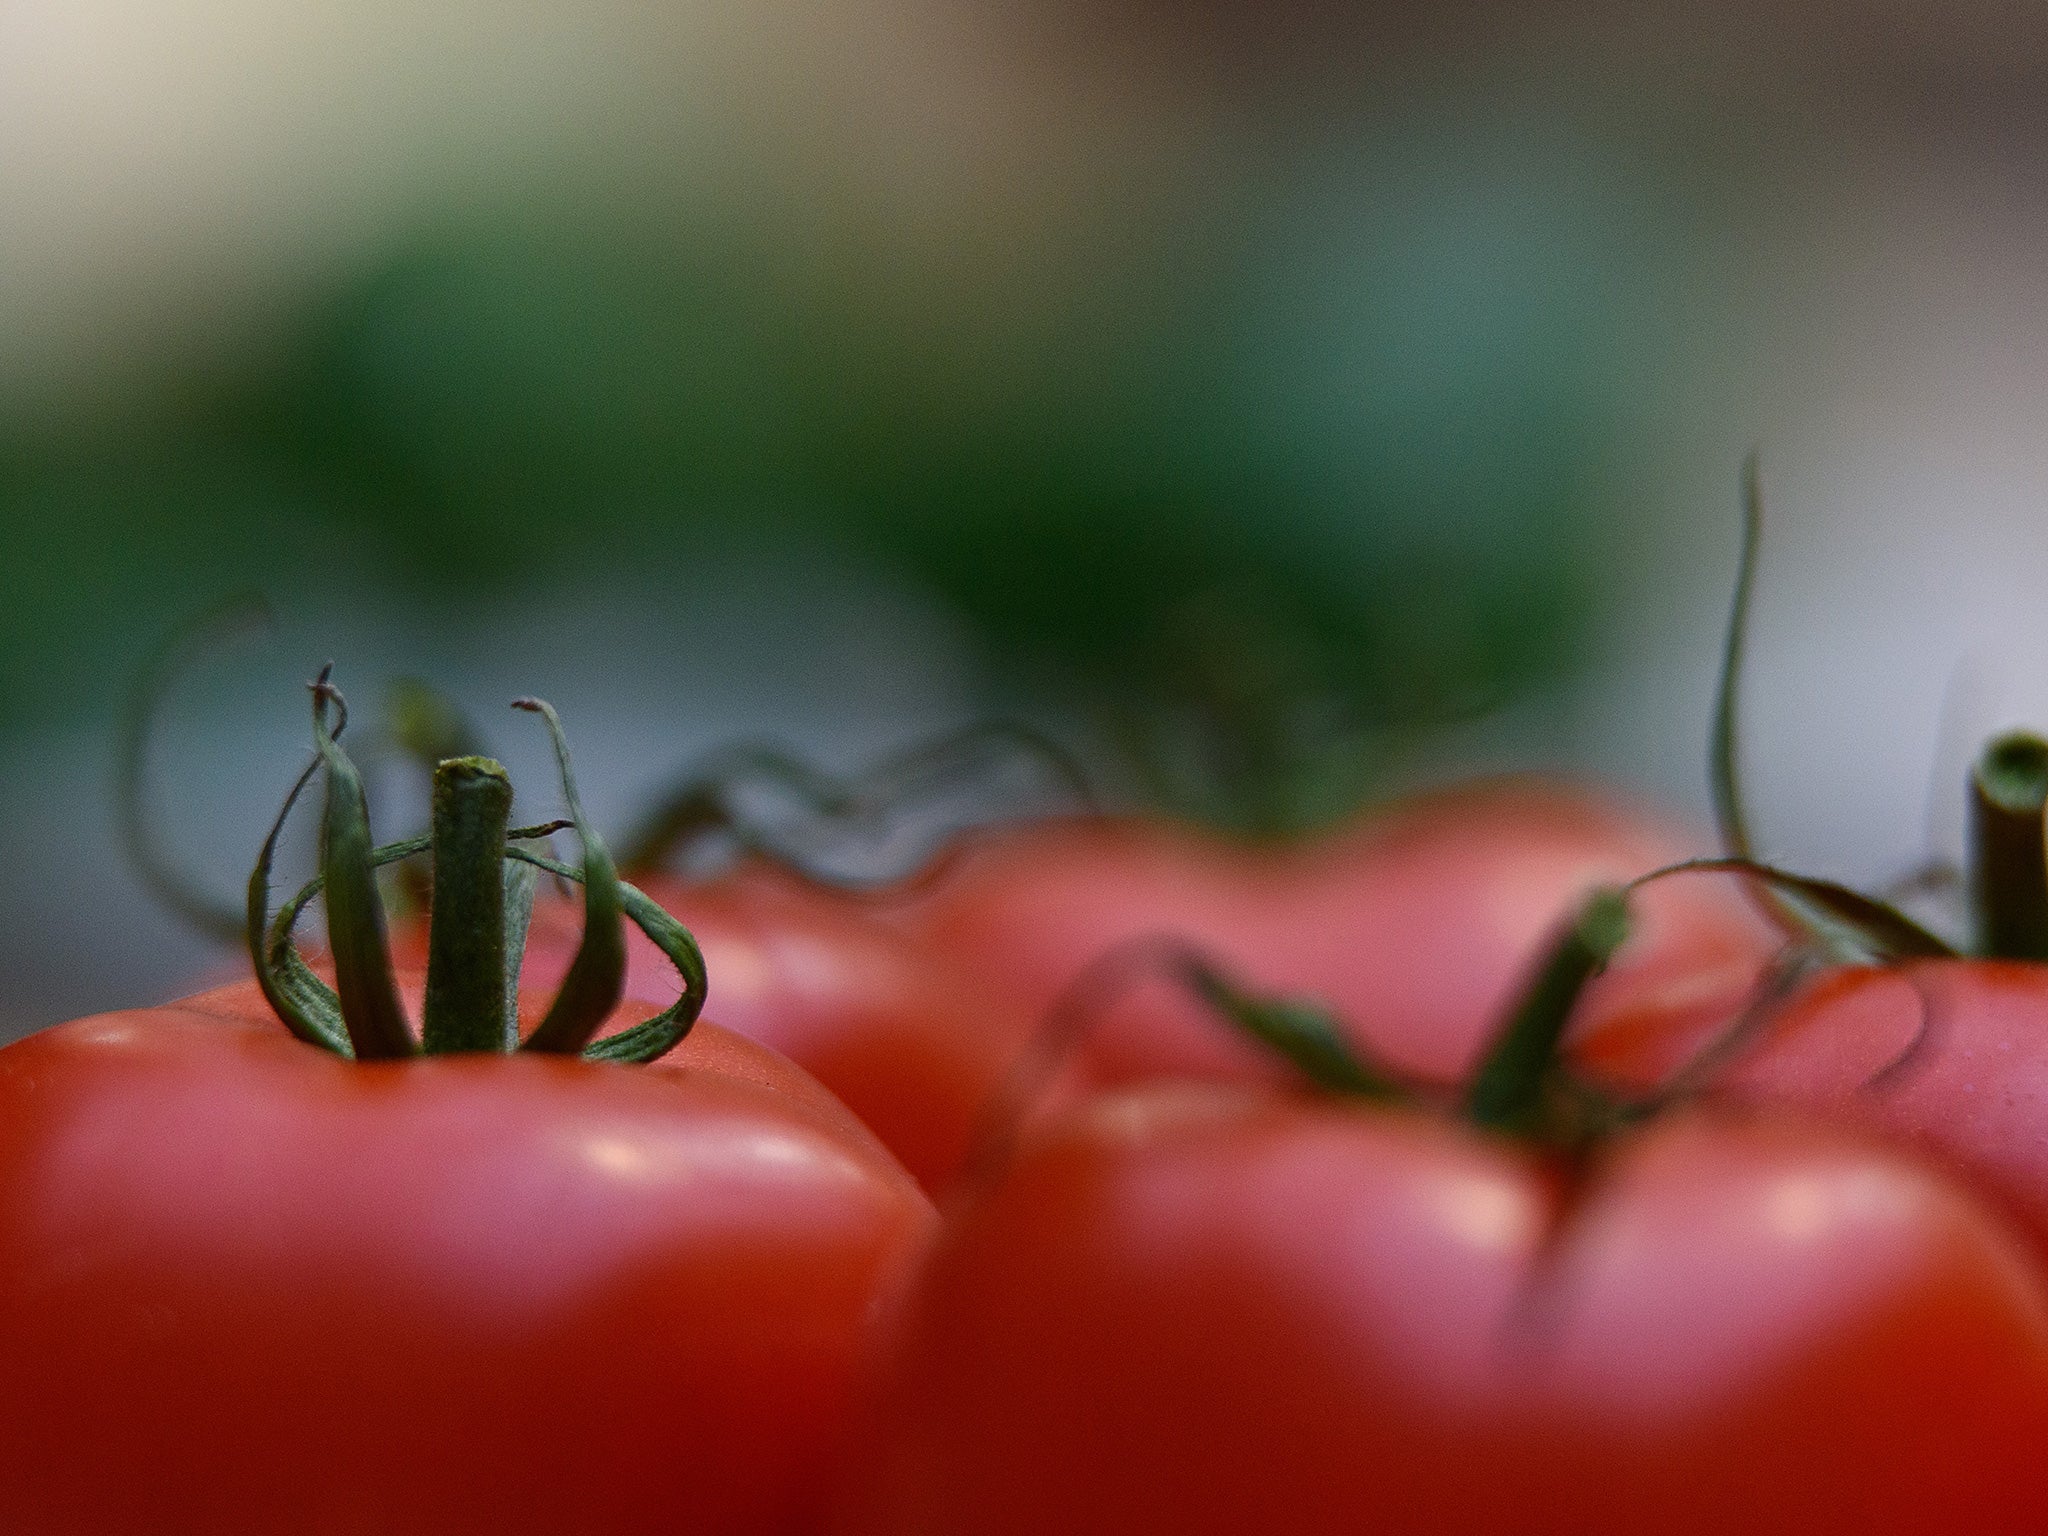 The chemical in the tomatoes may combat heart disease, cancer, diabetes and Alzheimer's disease